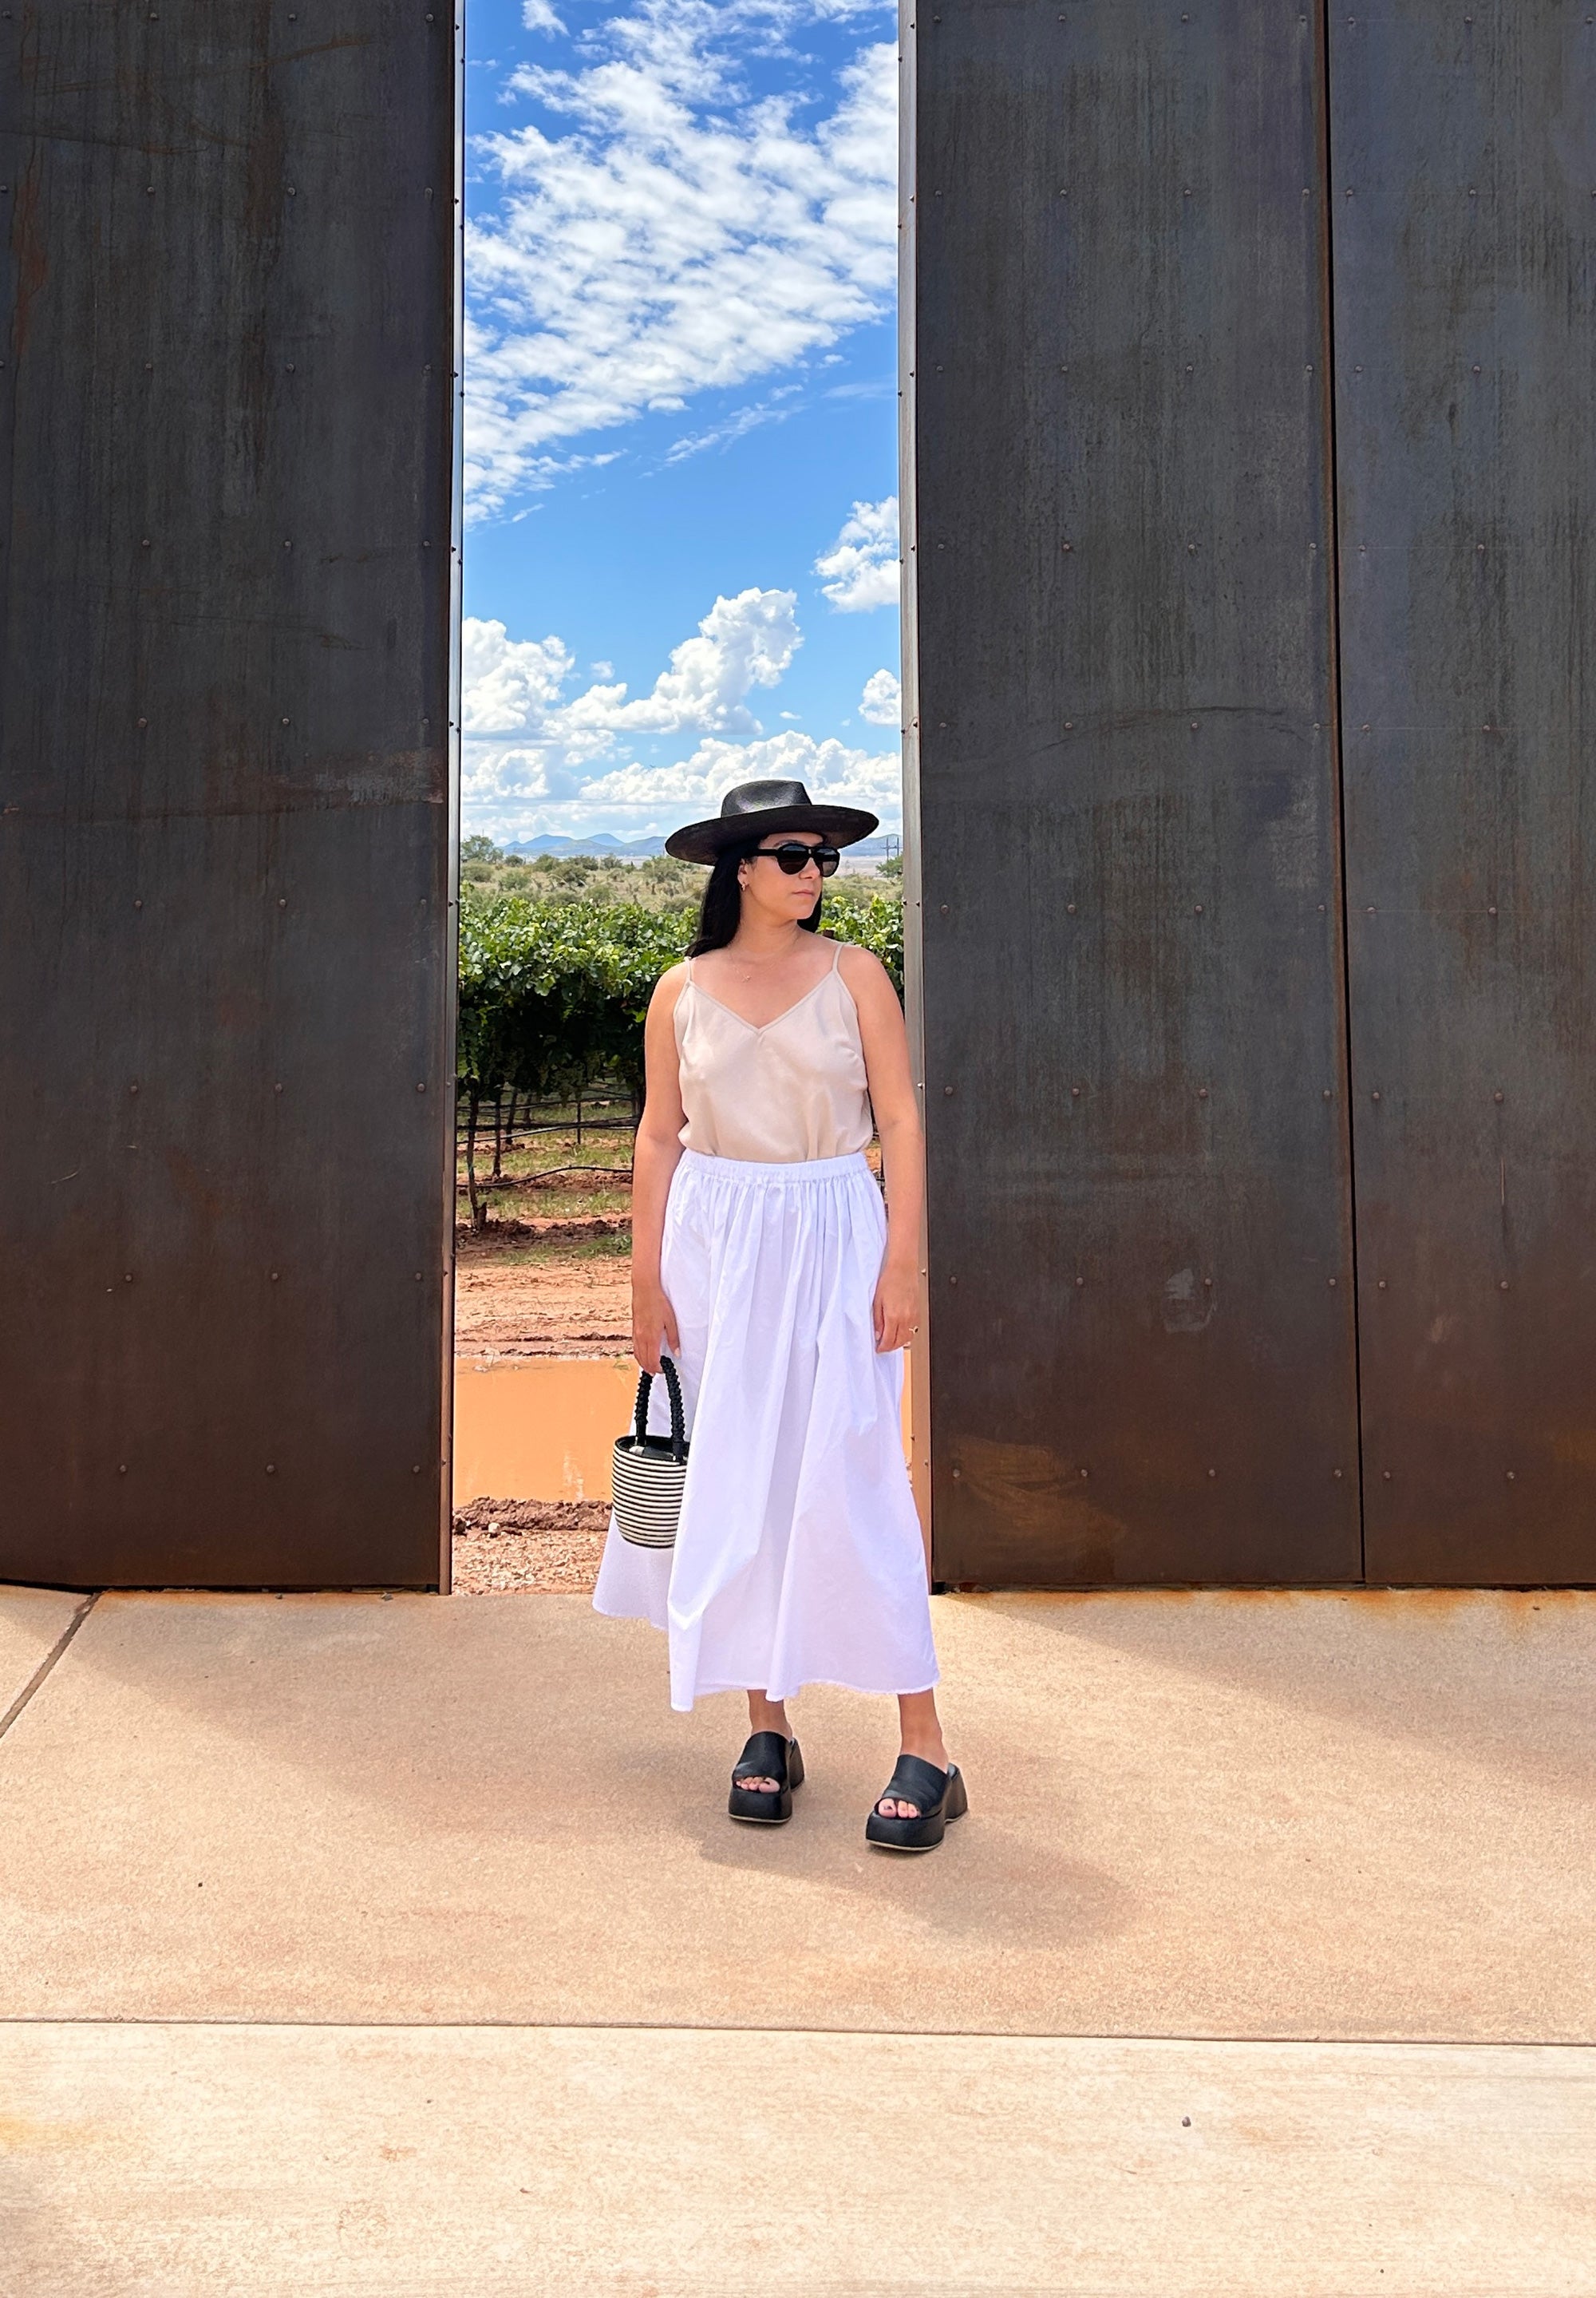 What To Wear To A Summer Vacation In The Desert